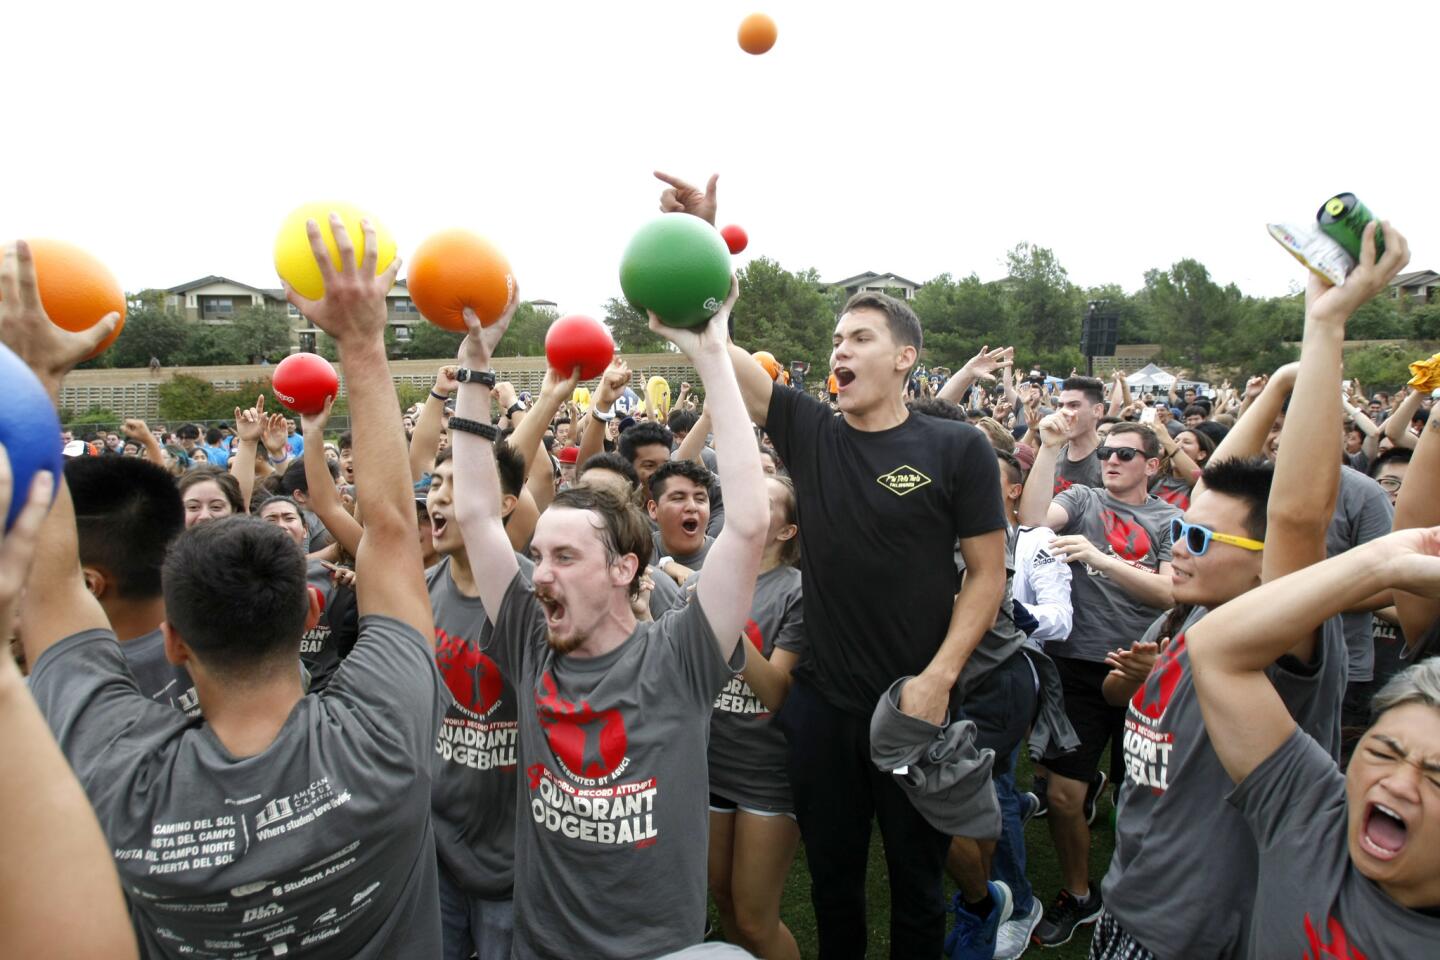 The gray team celebrates beating three other teams after about more than one hour of four-quadrant dodgeball play at UC Irvine's Anteater Recreation Center sports field on Tuesday, Sept. 20, 2016. The university attempted to break a Guinness World Record for the largest game of four-quadrant dodgeball.